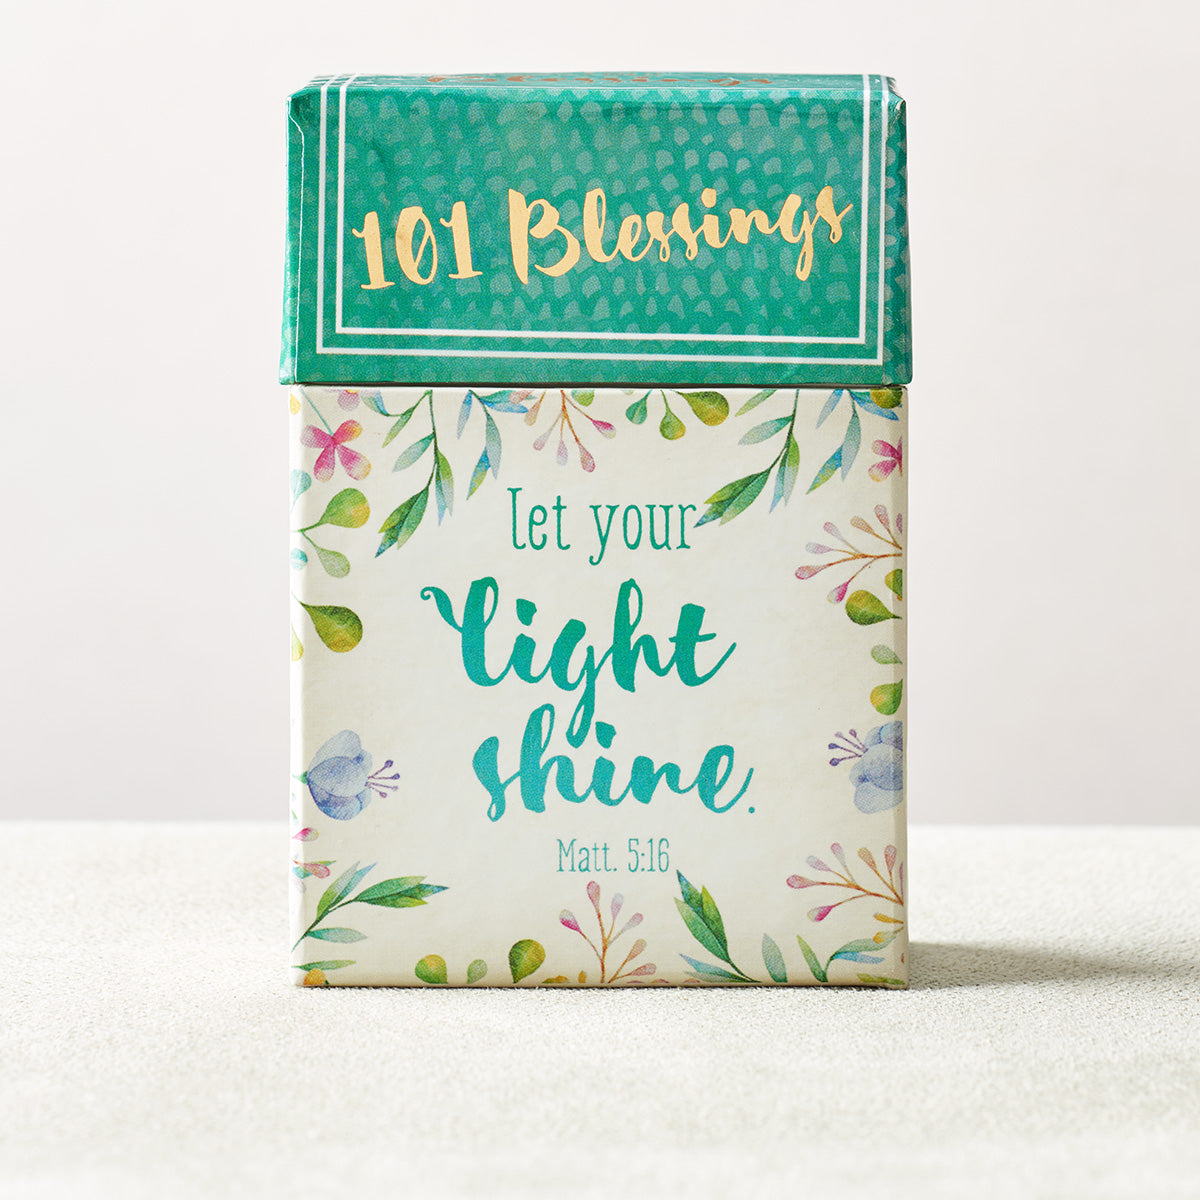 Let Your Light Shine Box of 101 Blessings - The Christian Gift Company